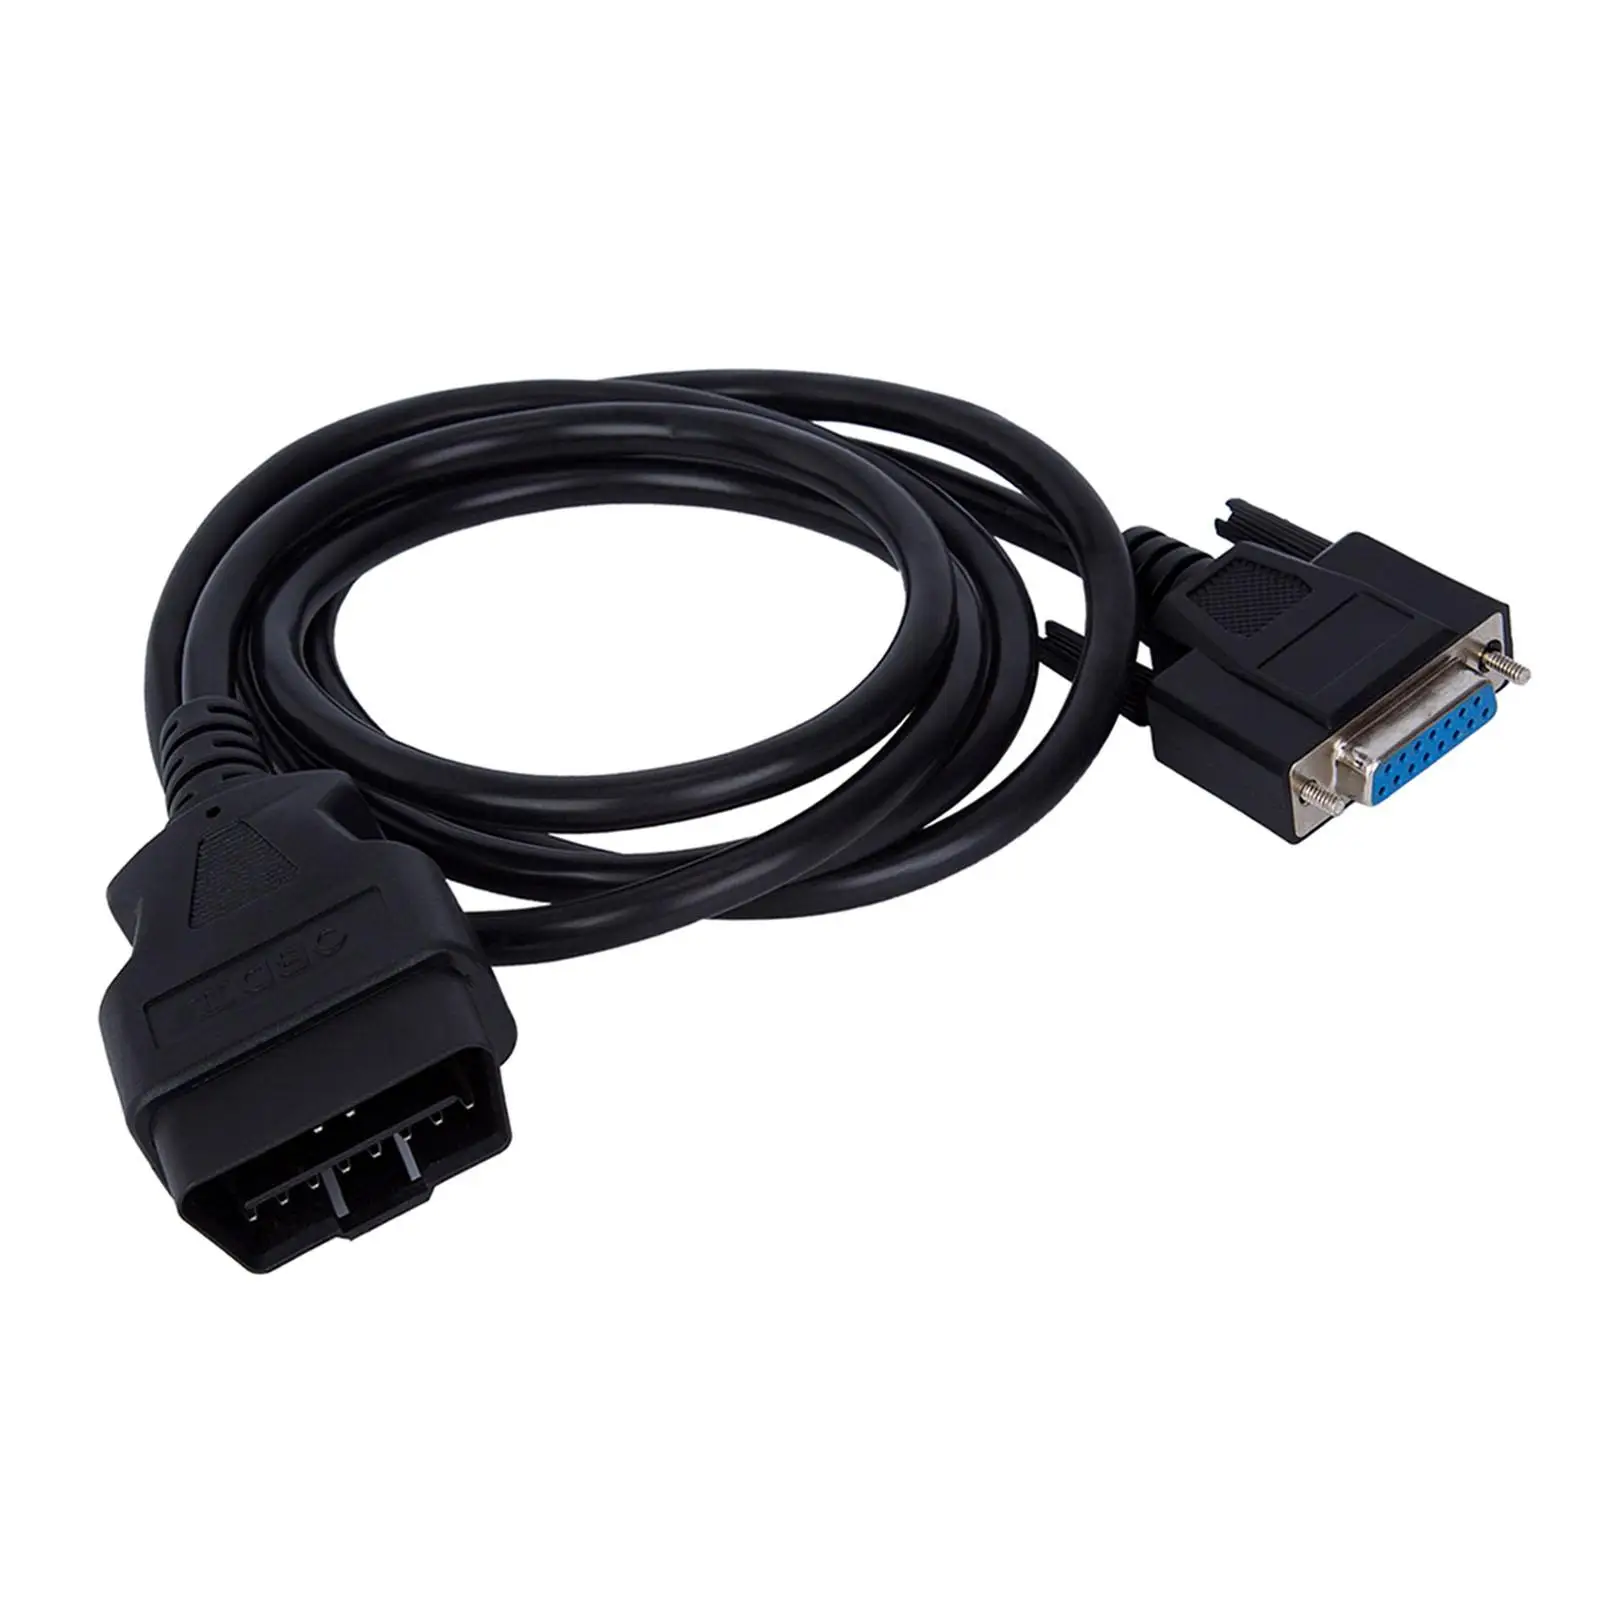 OBD2 16Pin Male to Female Extension Cable - Car Diagnostic Extender Cord... - $22.19